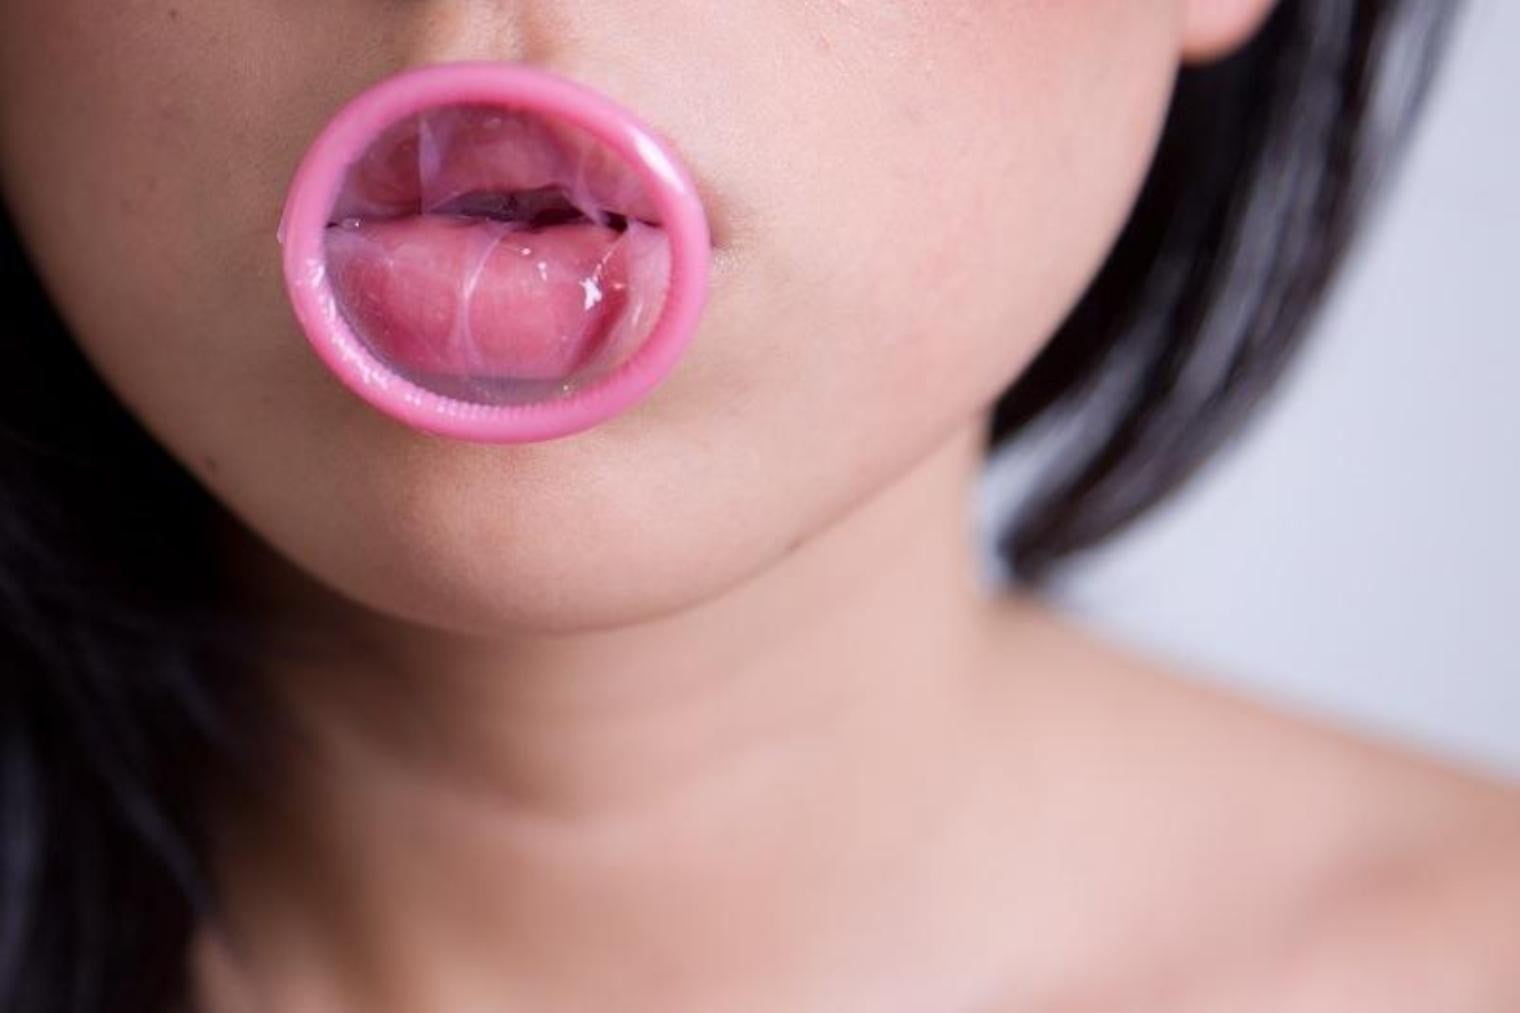 pink condom in person's mouth.